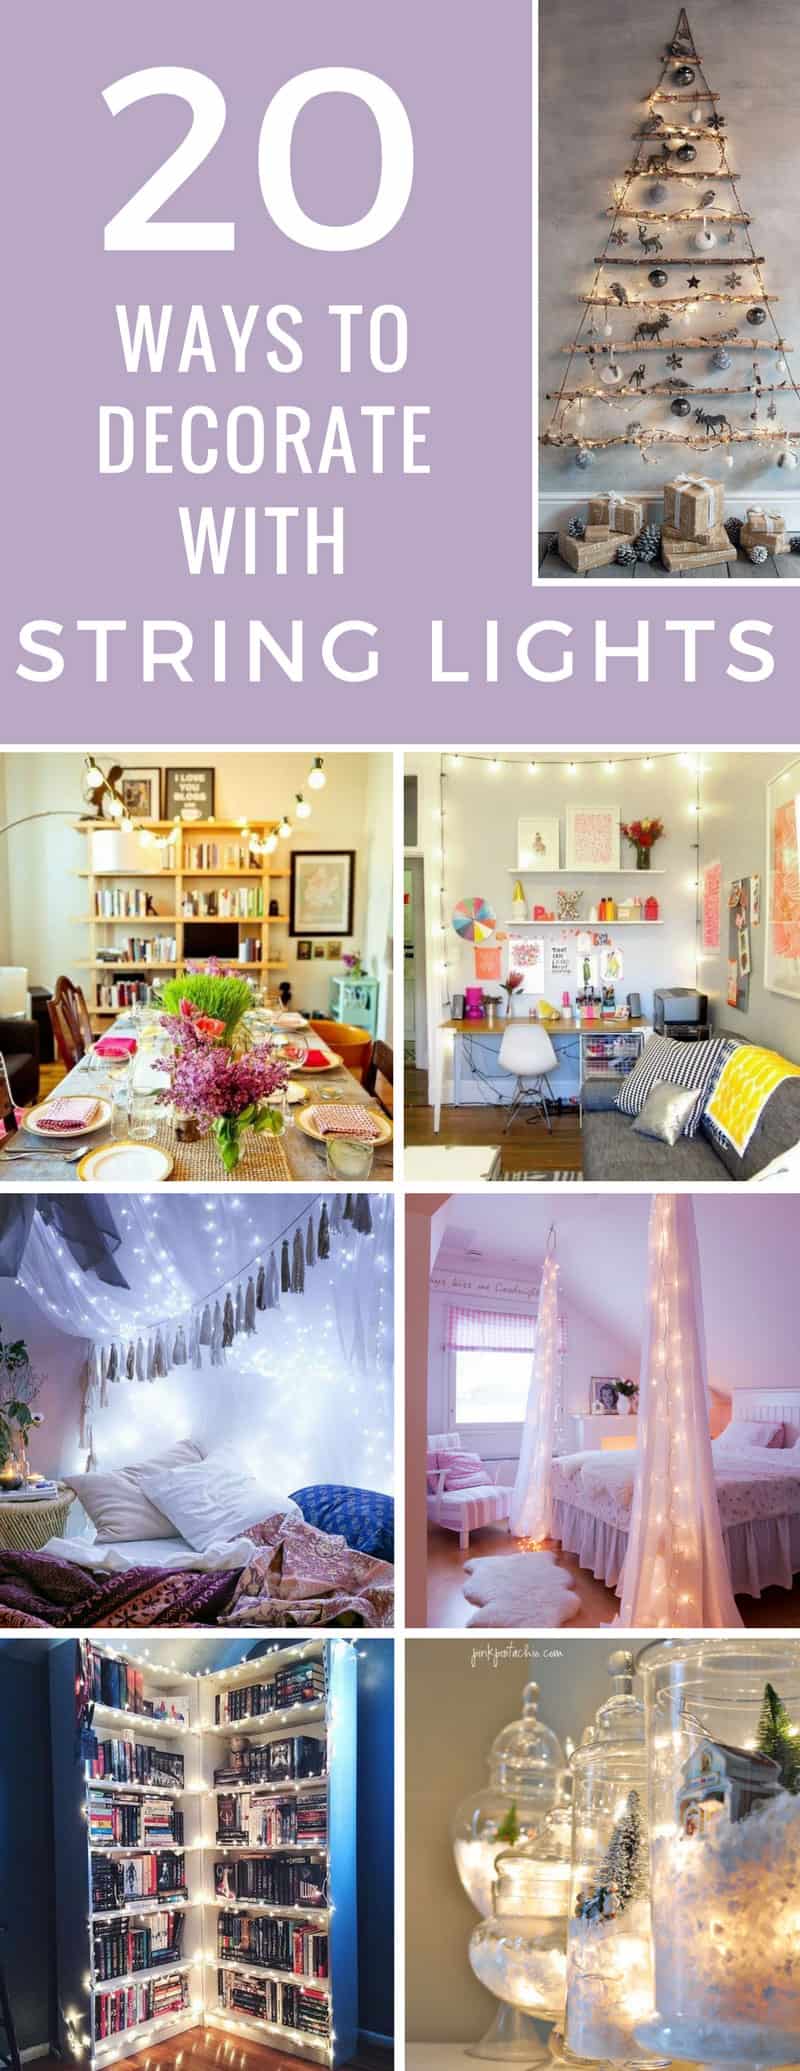 Who says string lights are just for Christmas? Thanks to these decorating ideas I now have an excuse to make my home twinkly all year round!